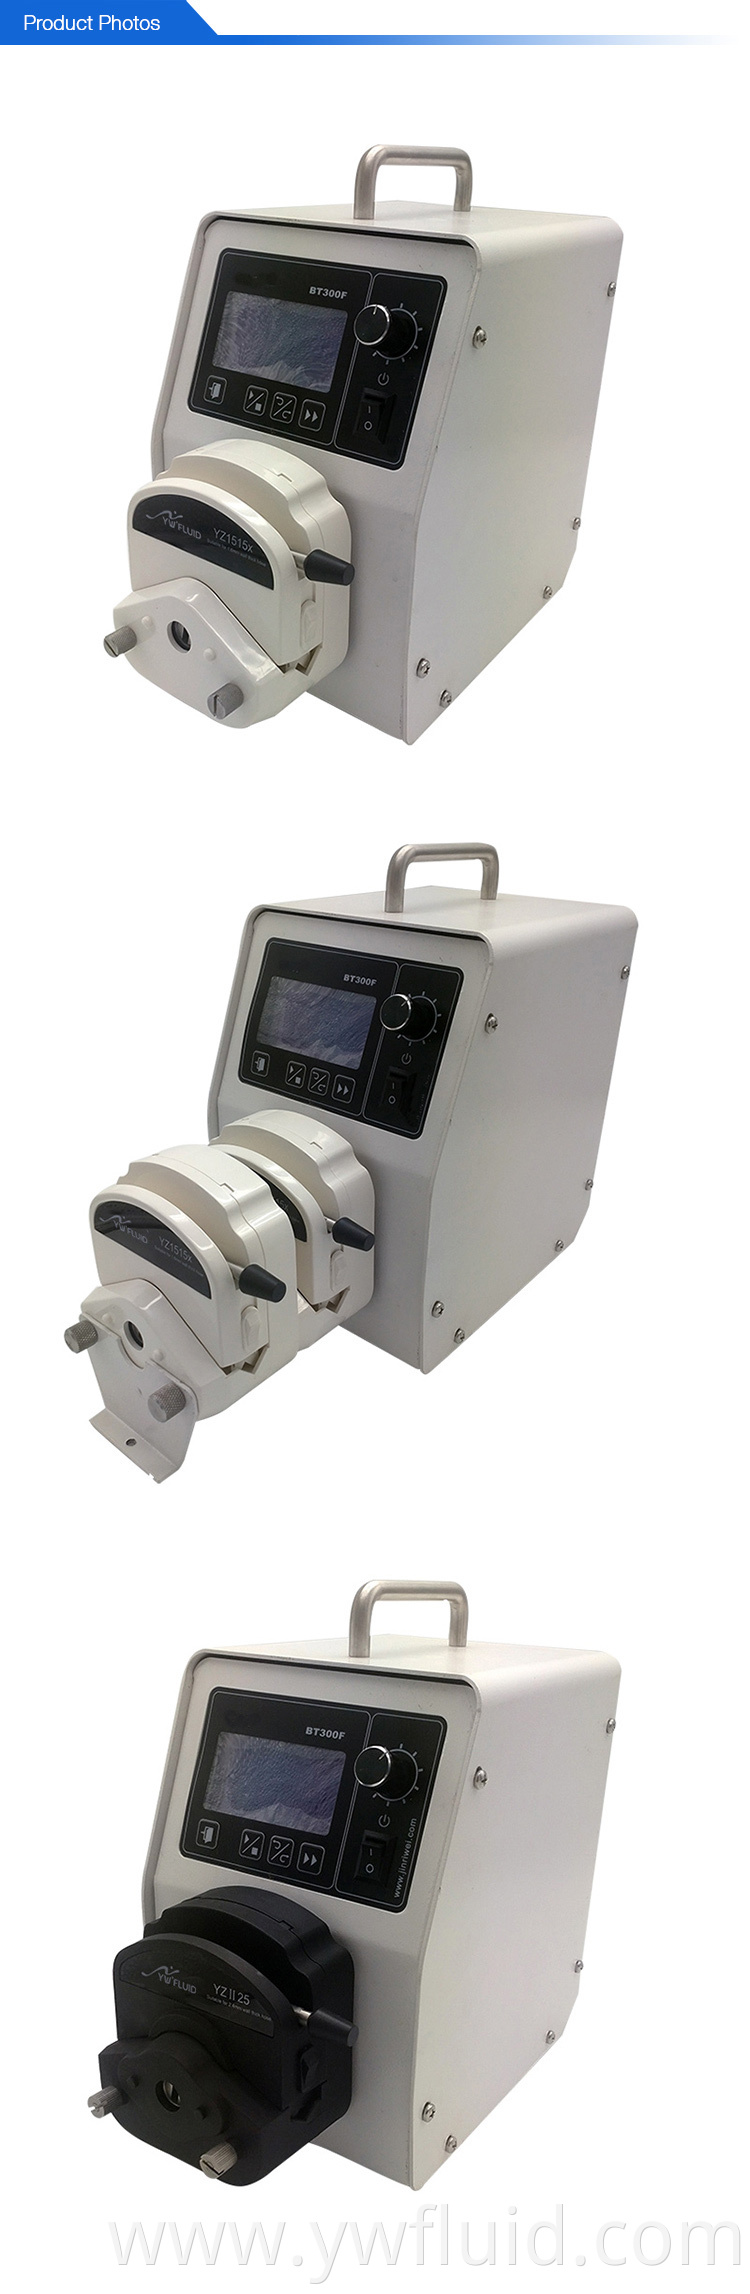 YWfluid medical dosing pump with AC motor for liquid sampling transfer suction or filling